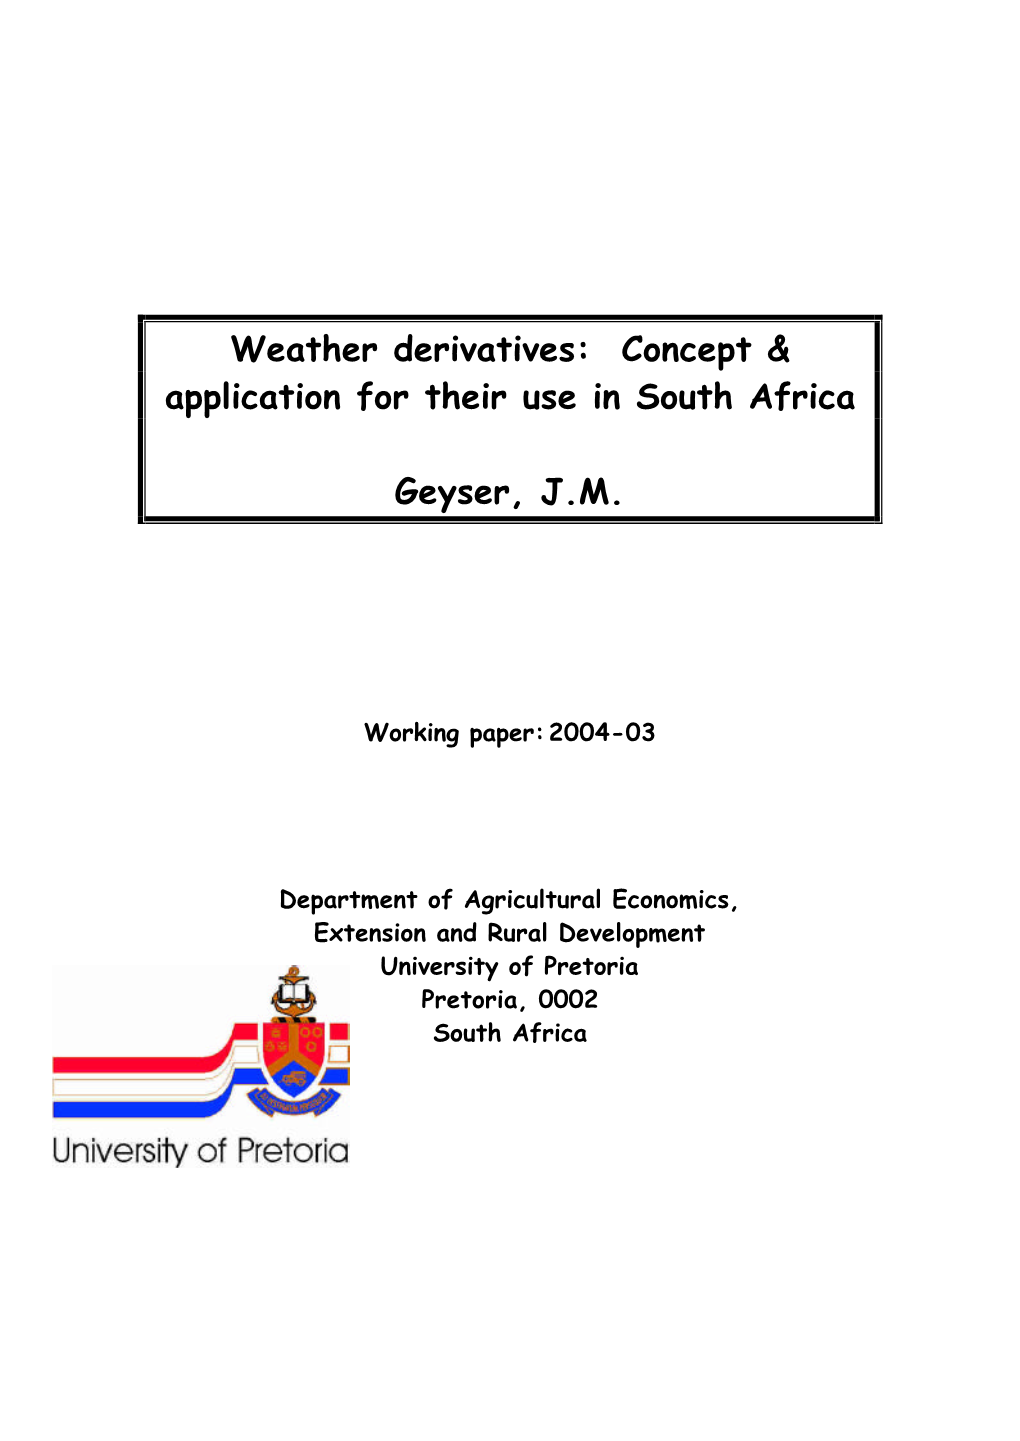 Weather Derivatives: Concept & Application for Their Use in South Africa